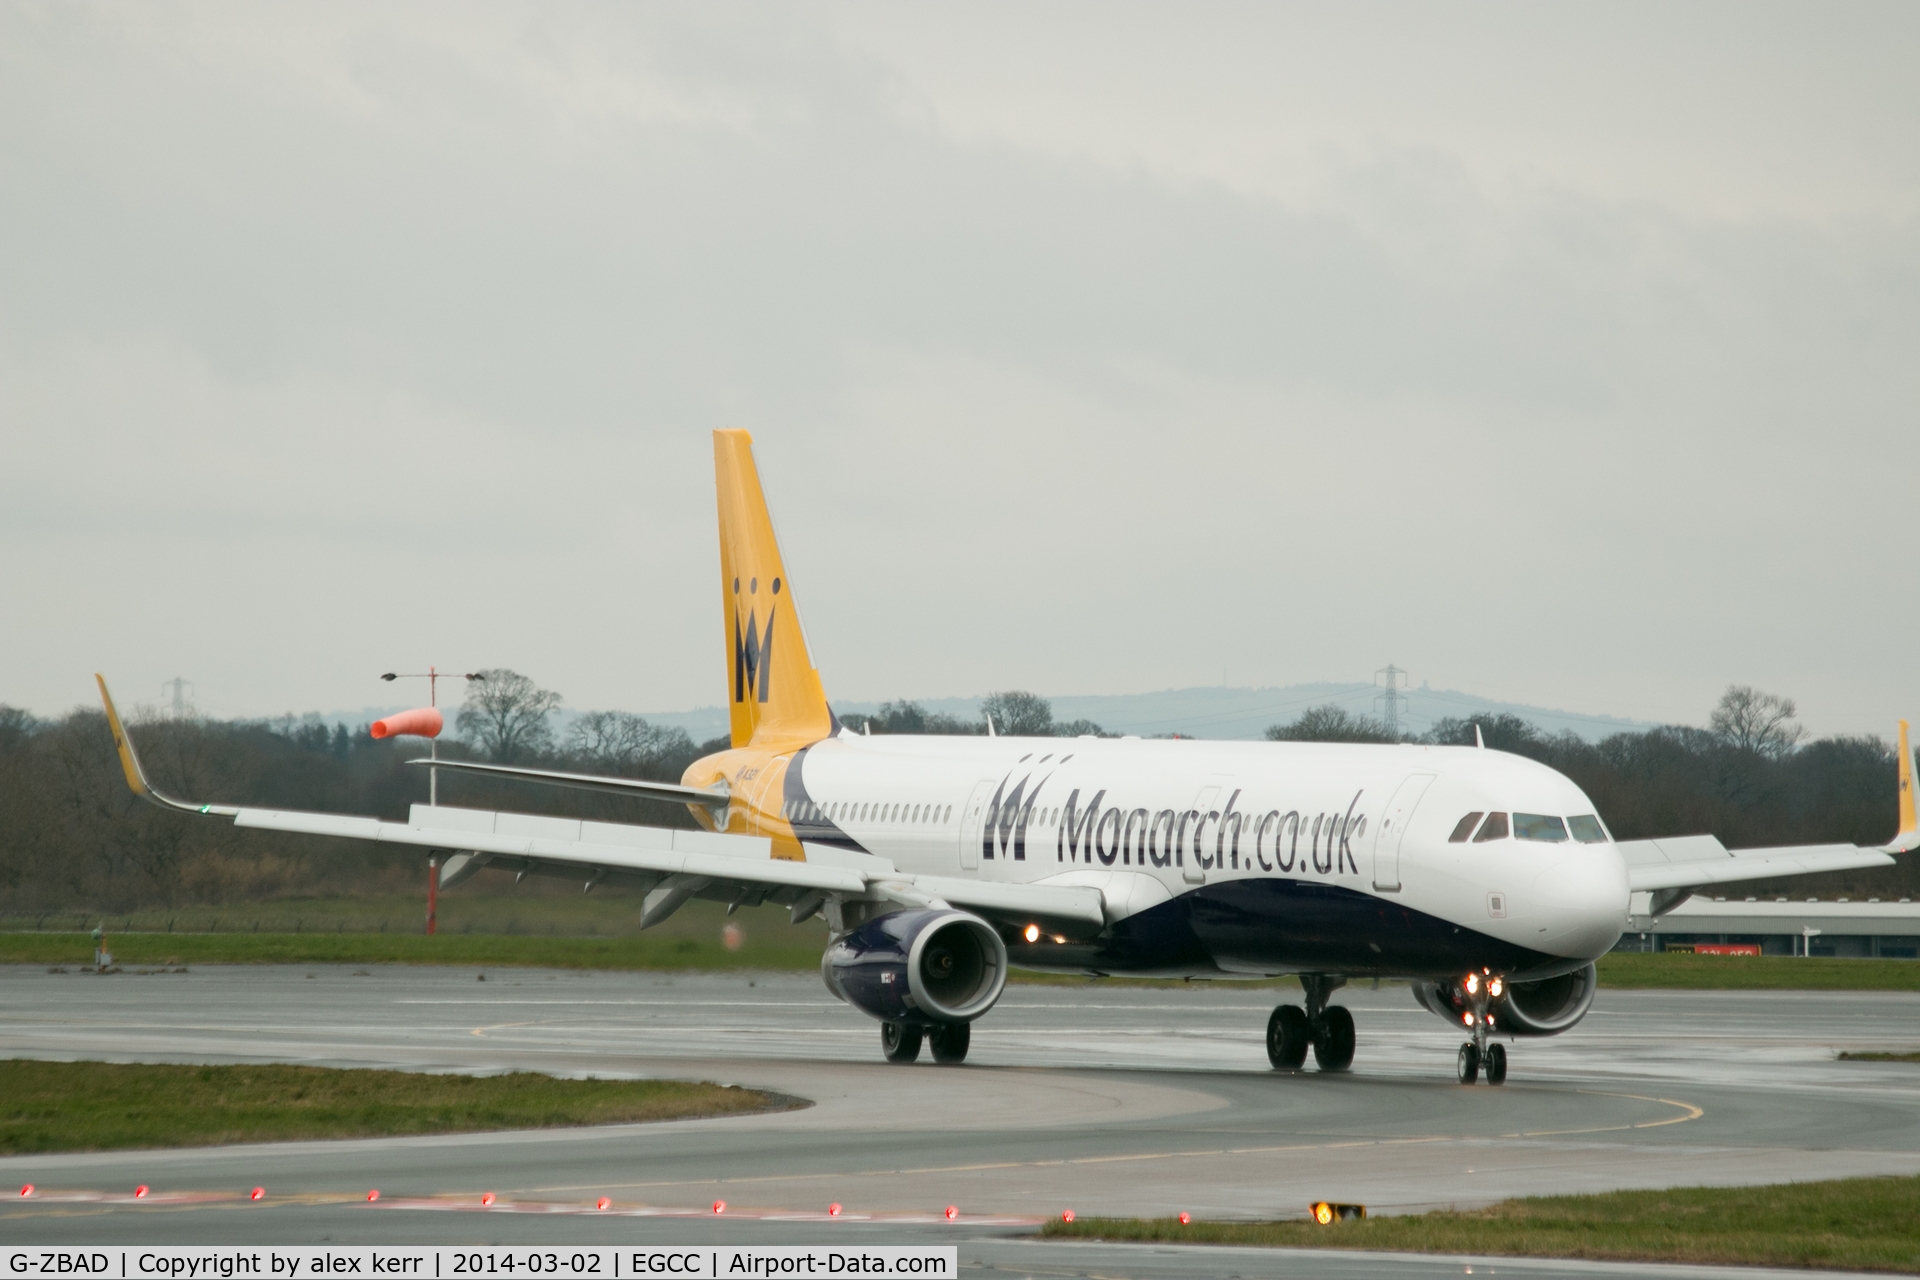 G-ZBAD, 2013 Airbus A321-231 C/N 5582, monarch